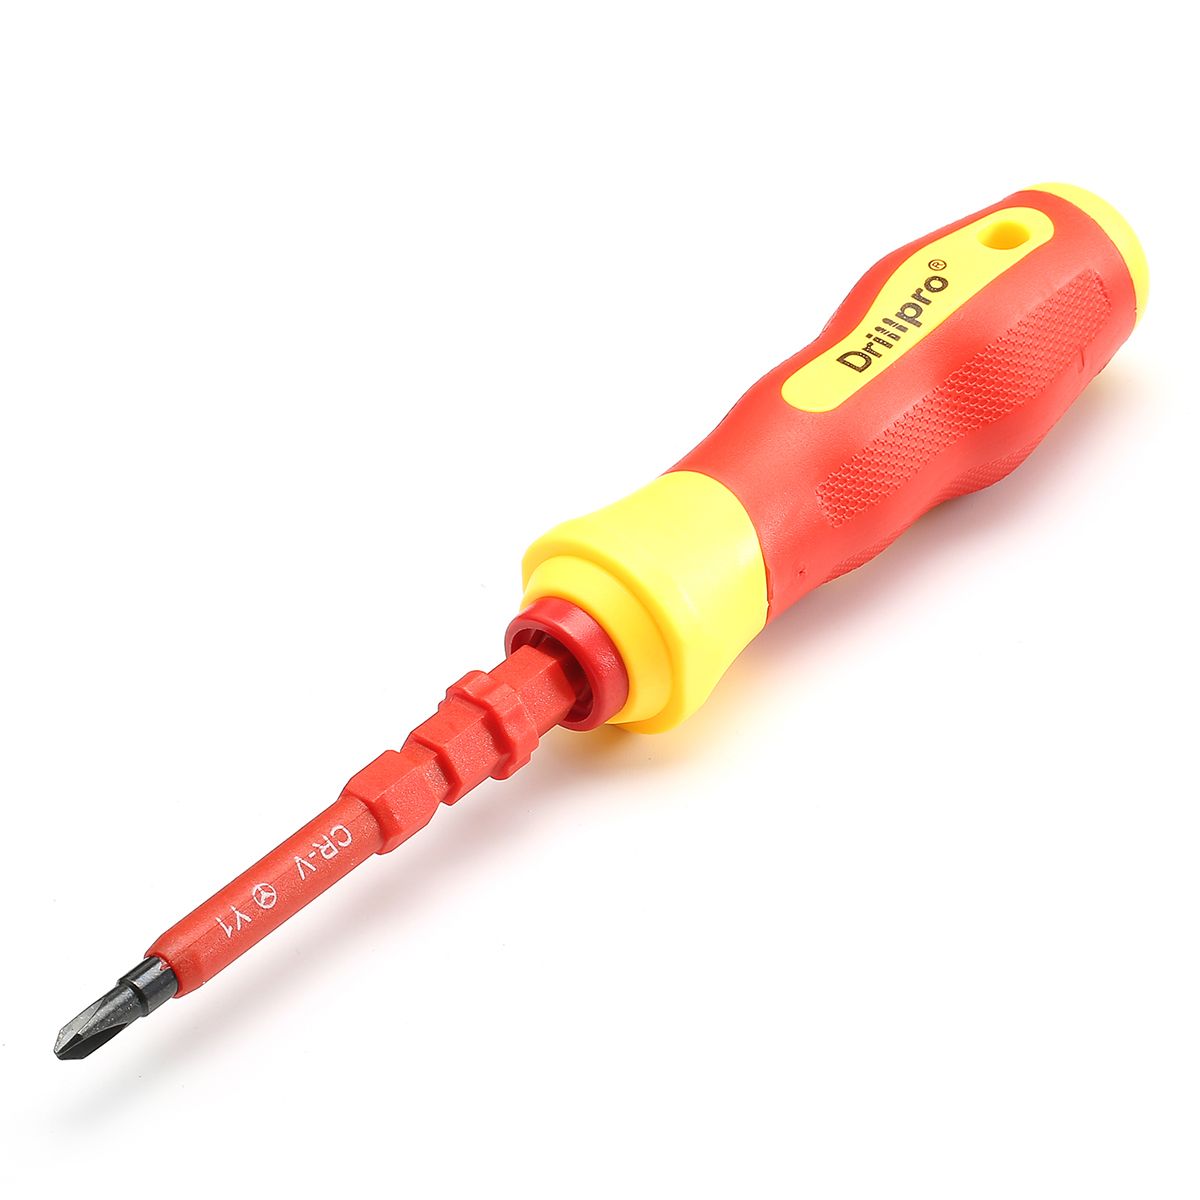 Drillpro-7pcs-Electronic-Insulated-Hand-Screwdriver-Tools-Accessory-Set-1150808